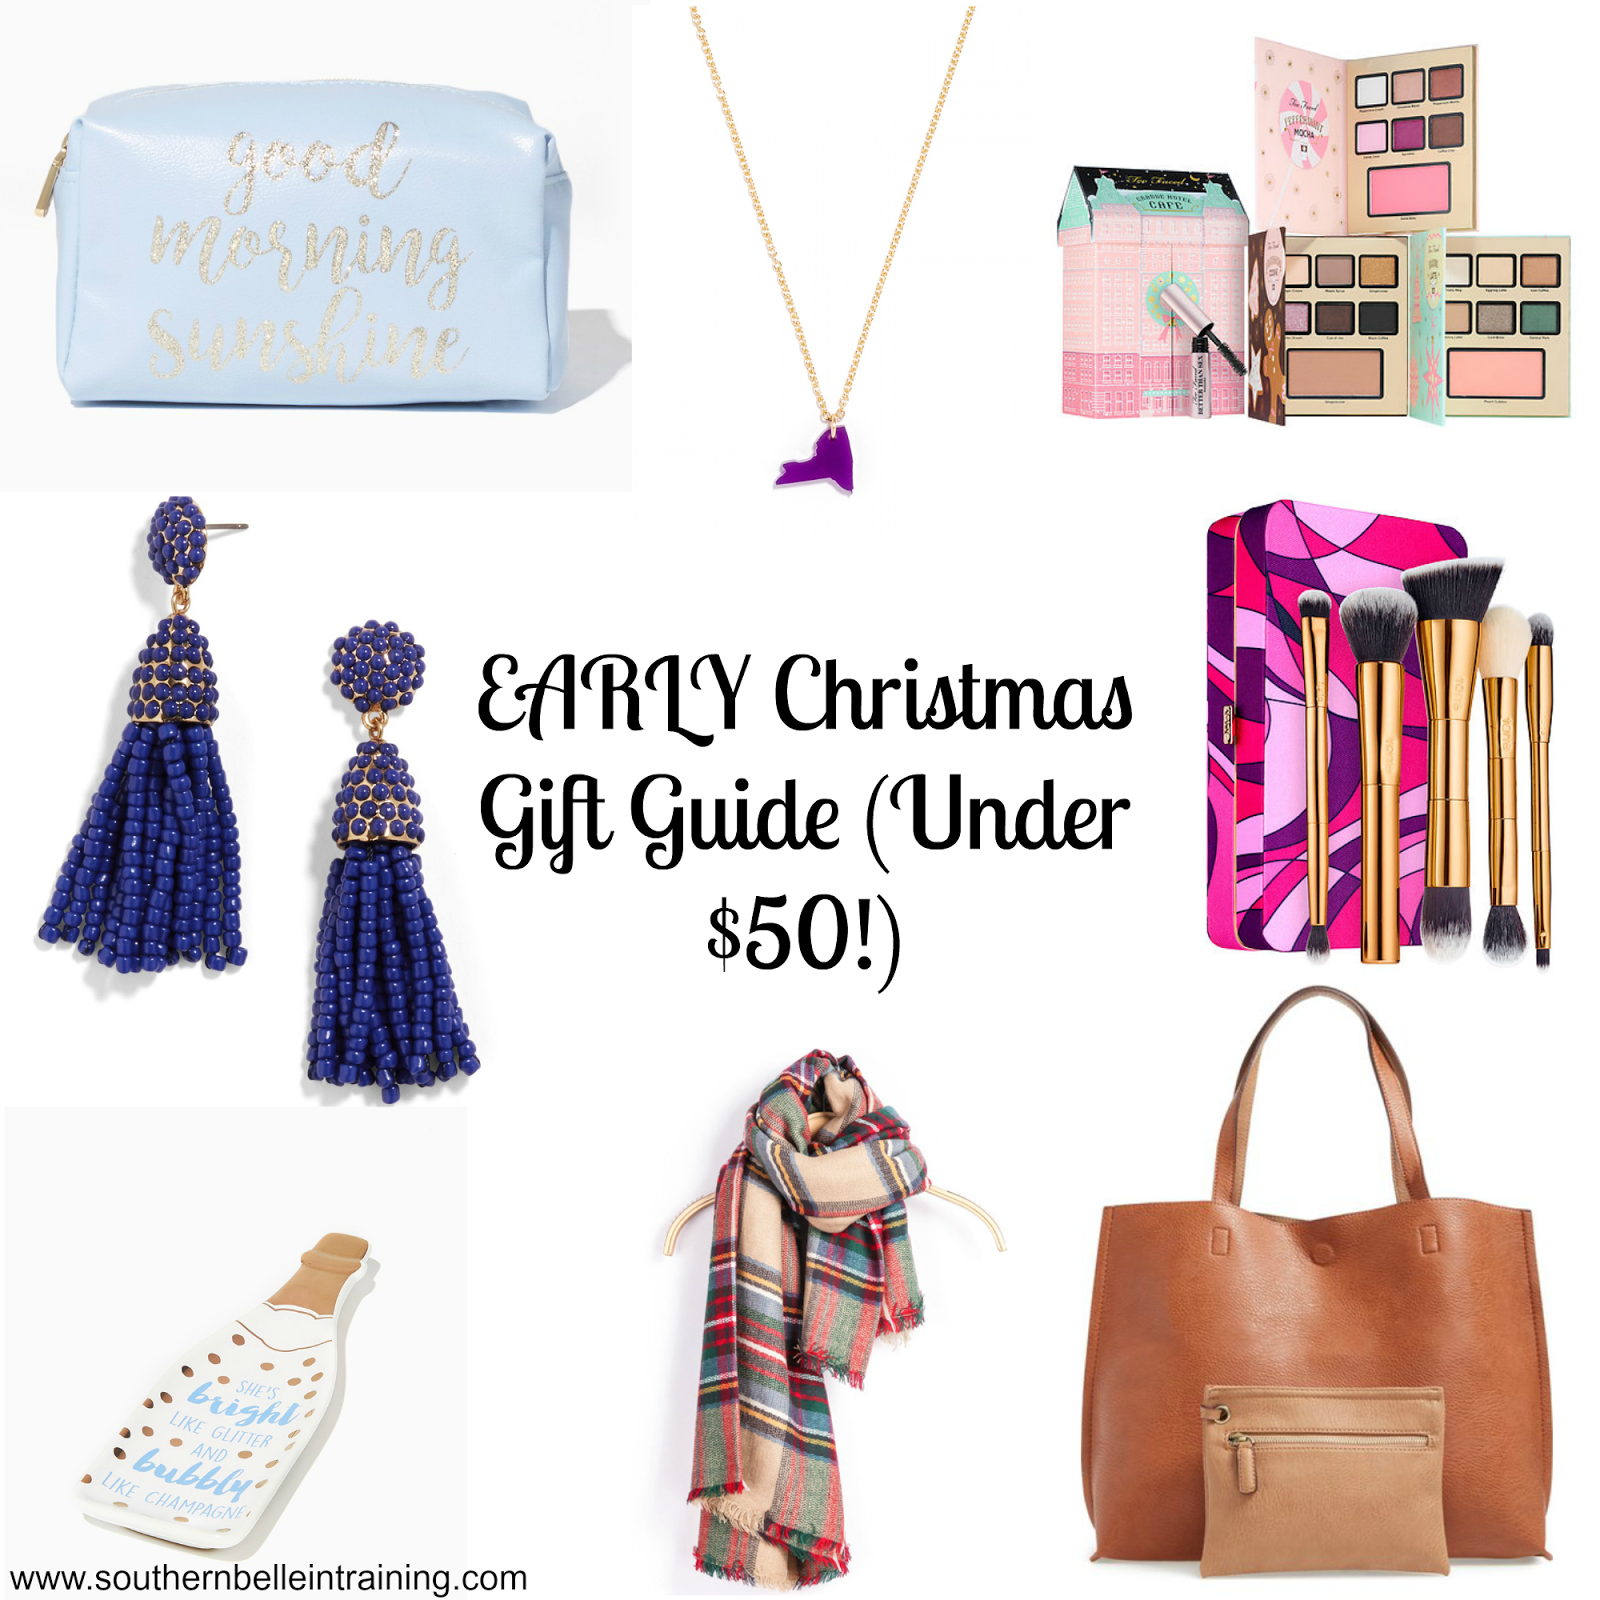 EARLY Christmas Gift Guide (All Gifts Under 50!). Southern Belle in